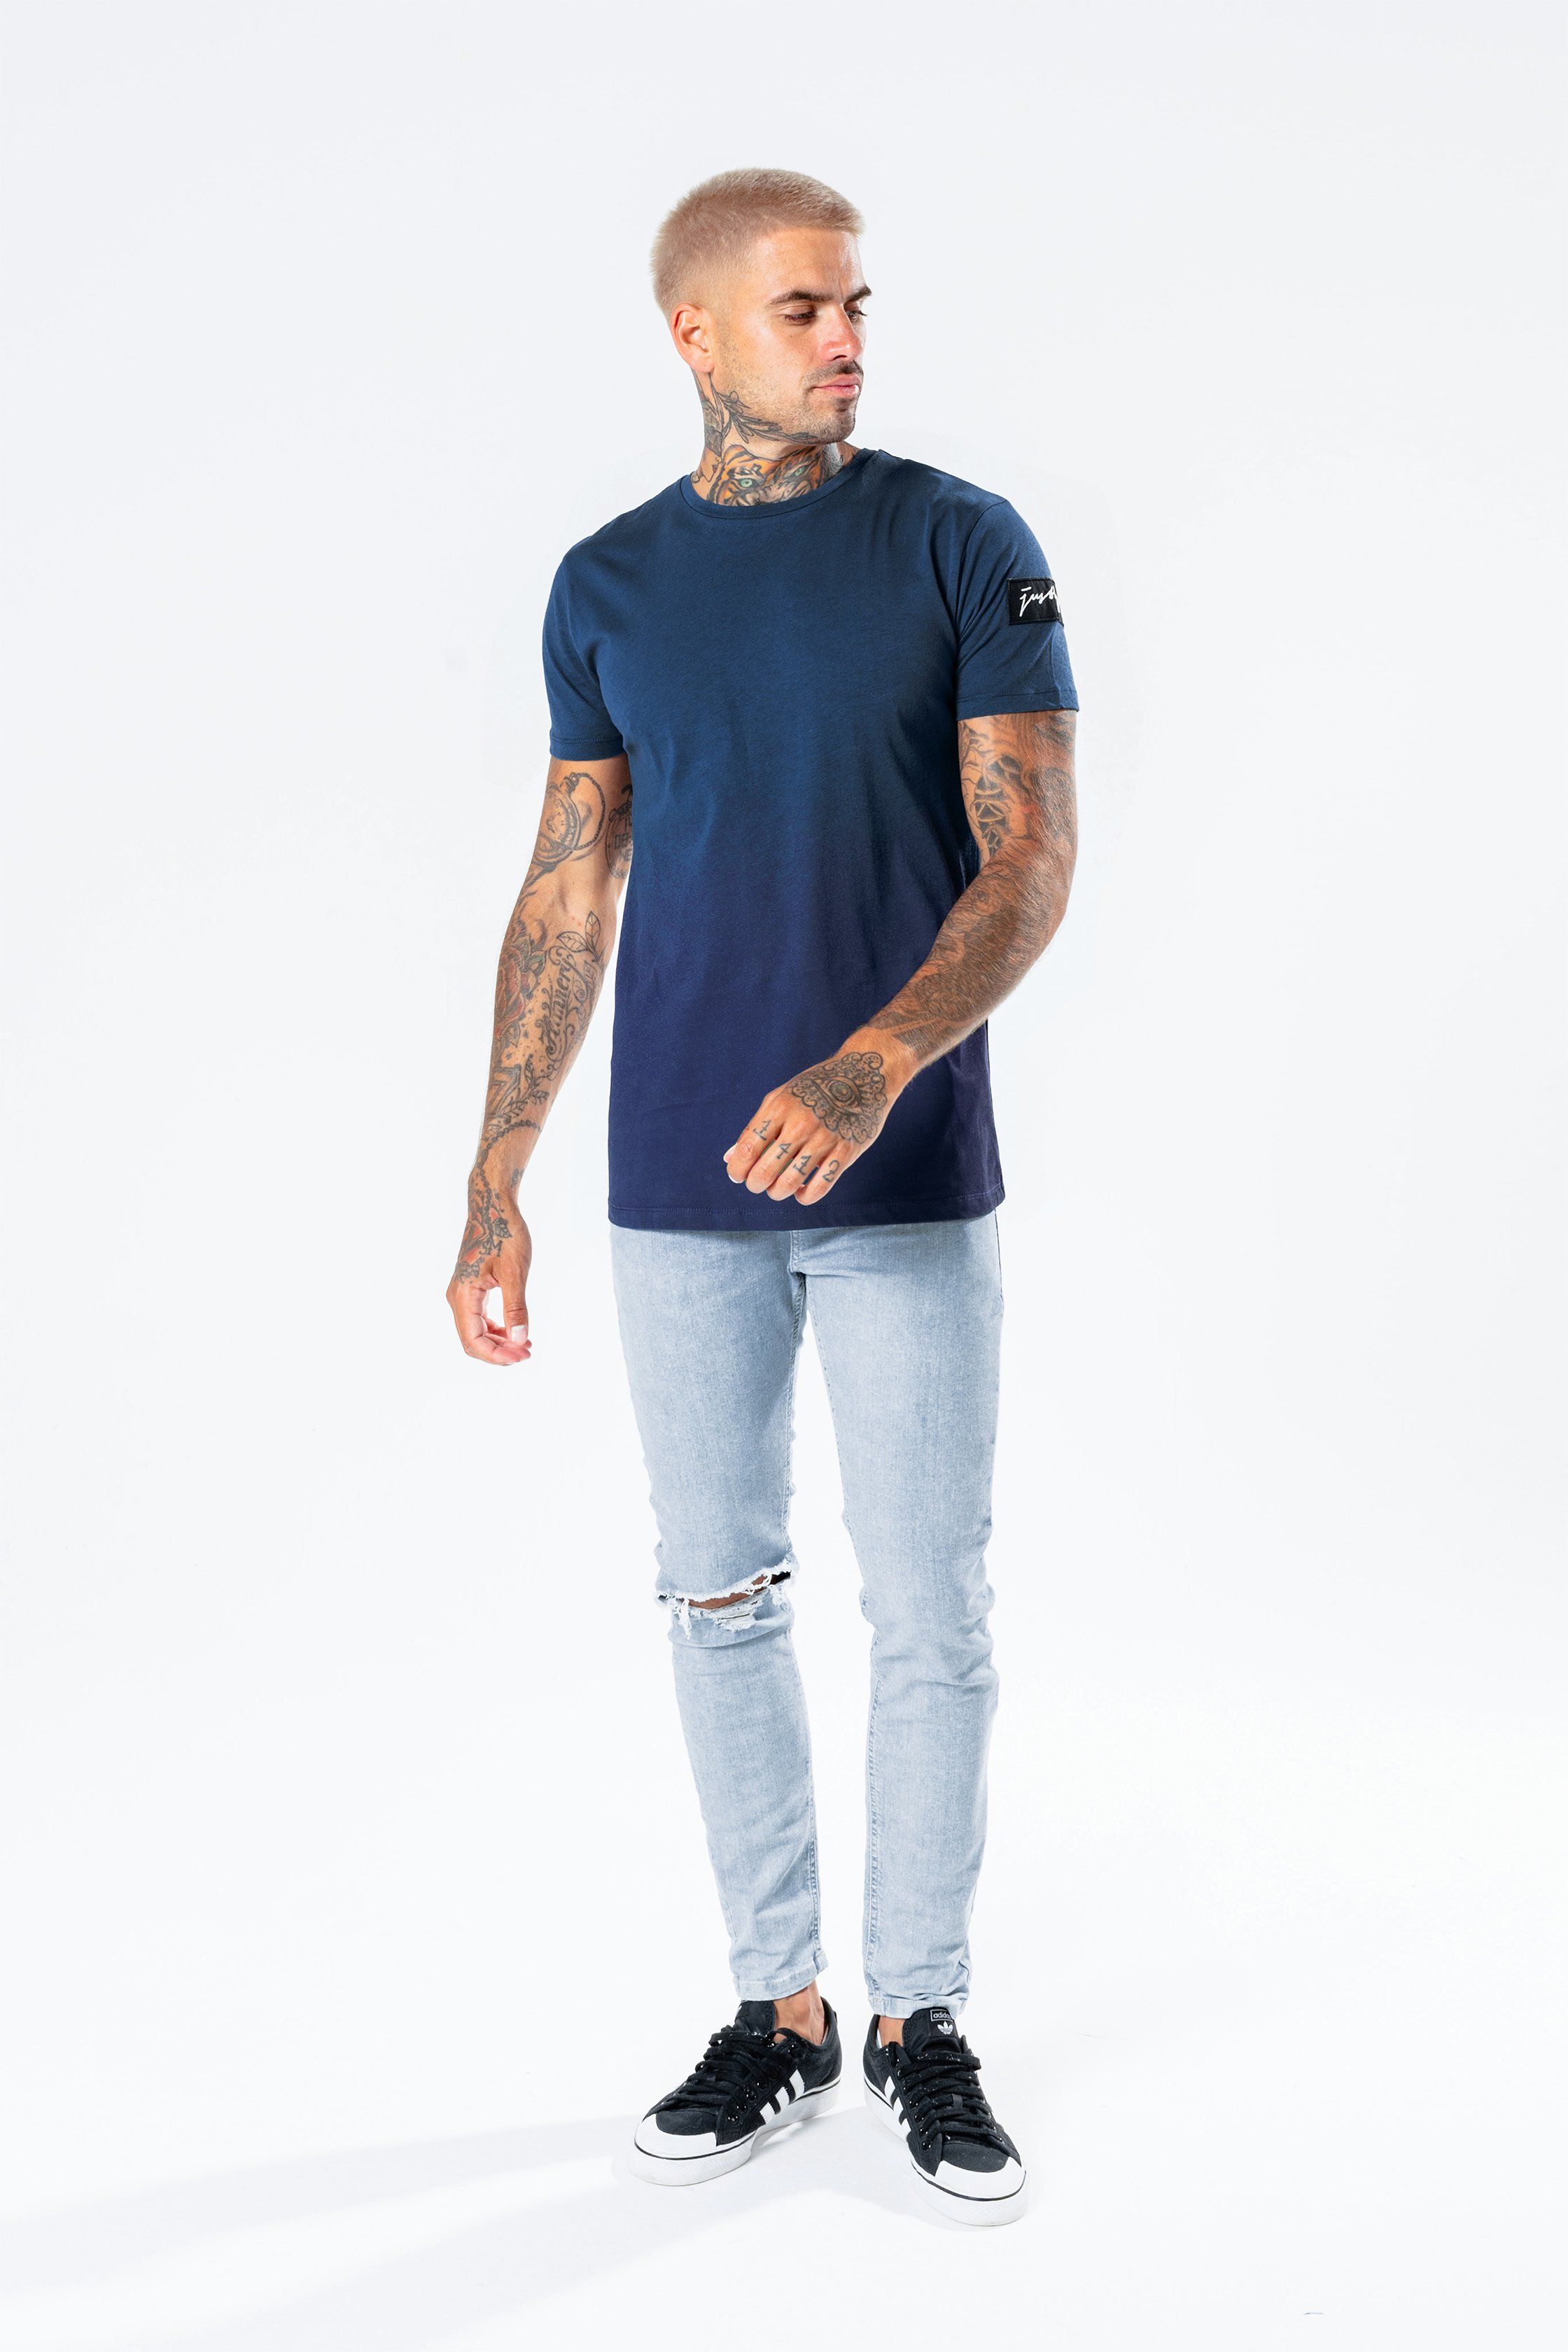 The HYPE. blue speckle fade men's t-shirt pairs perfectly with the HYPE. men's grey joggers. Coming in with a blue and navy colour palette in an 100% cotton fabric base for supreme comfort. Designed in our standard men's tee shape, with a crew neck line and short sleeves for a classic cut. In an all over speckle and fade effect prints. Finished with an embroidered embossed sleeve patch. Wear with black skinny fit jeans for a smart-casual vibe. Machine wash at 30 degrees.